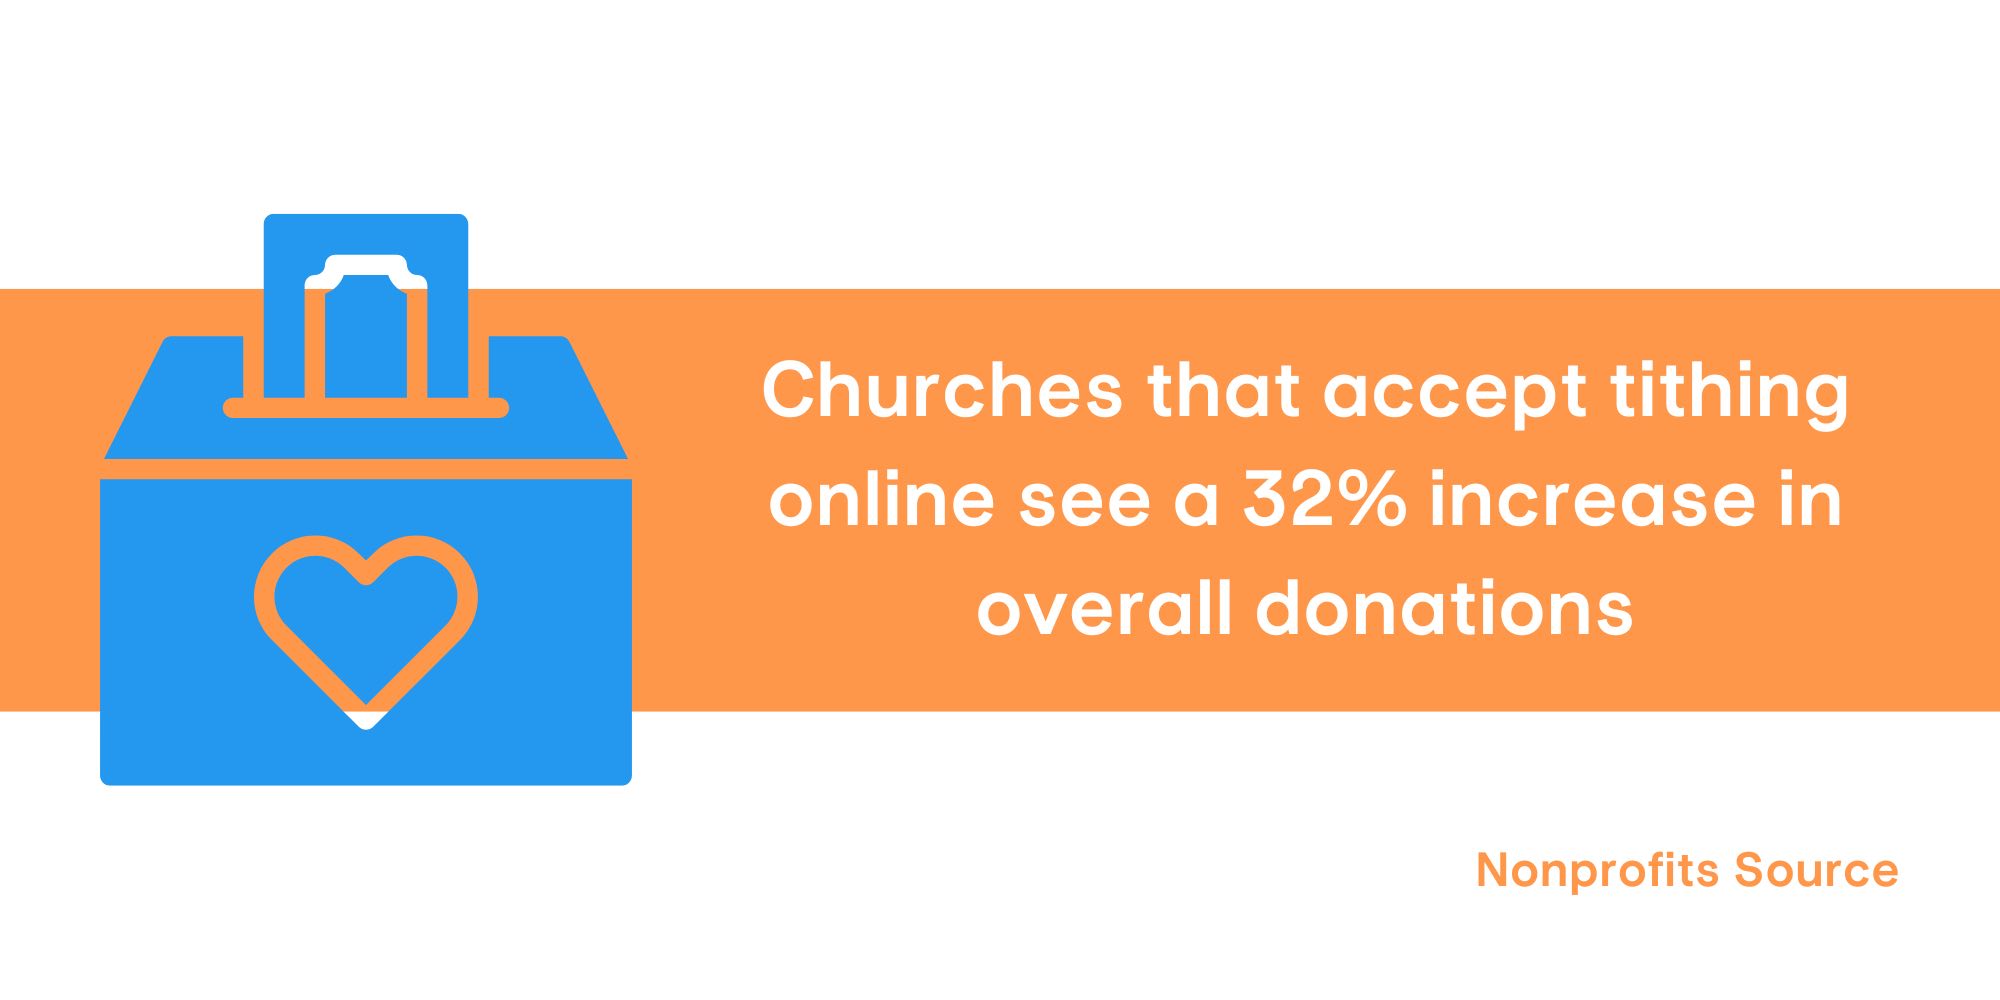 Onling giving in your church mobile app increases overall giving at your church